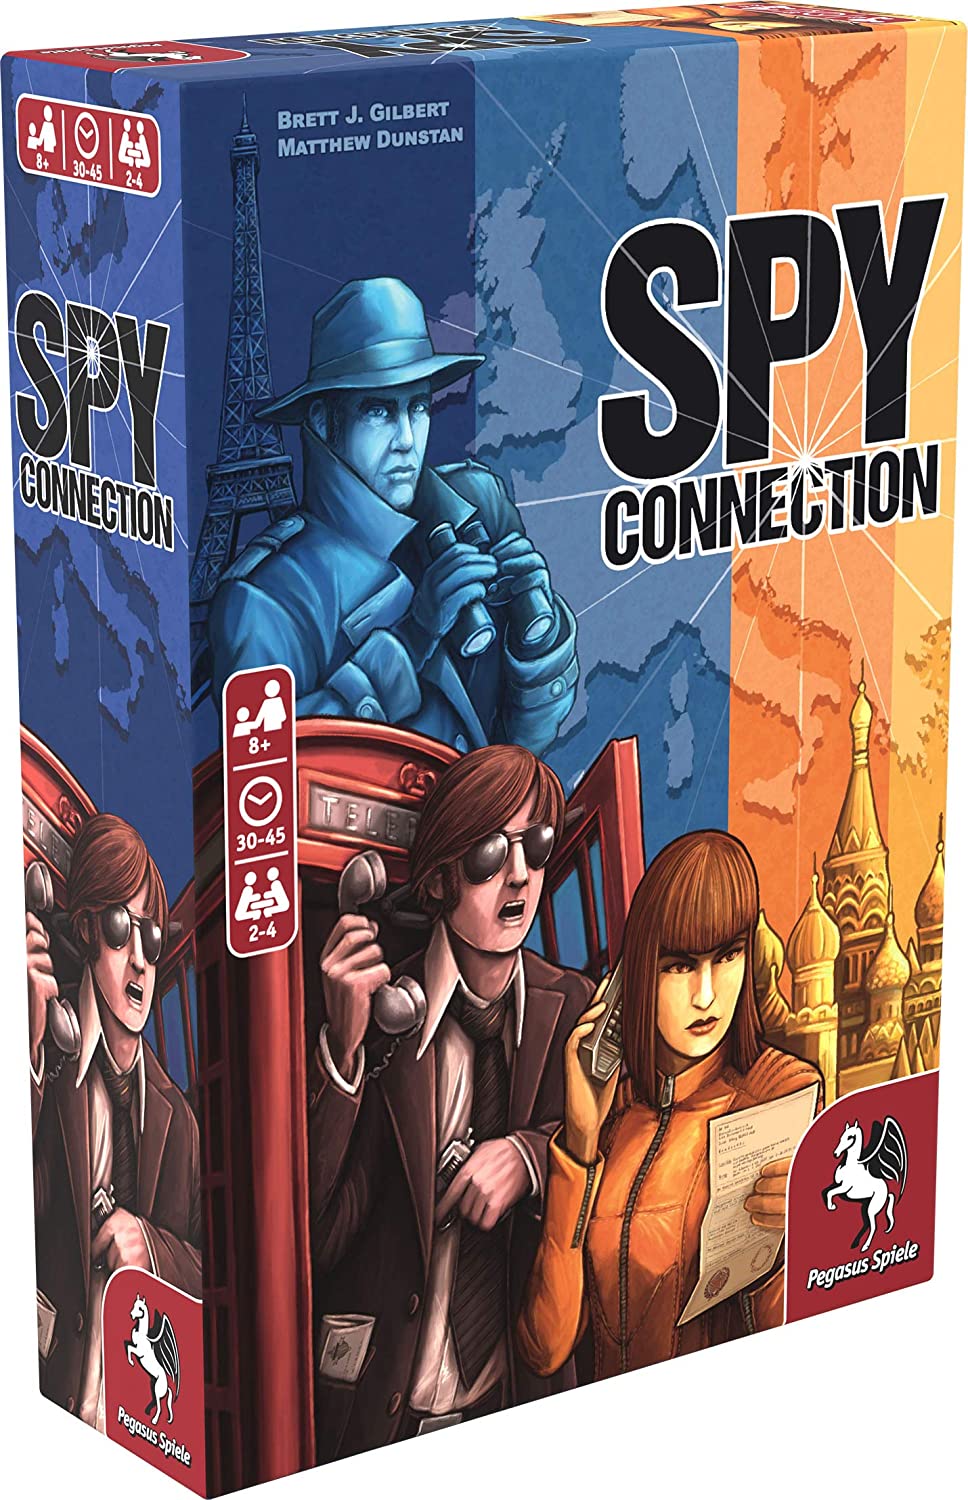 Spy Connection 0 (0)